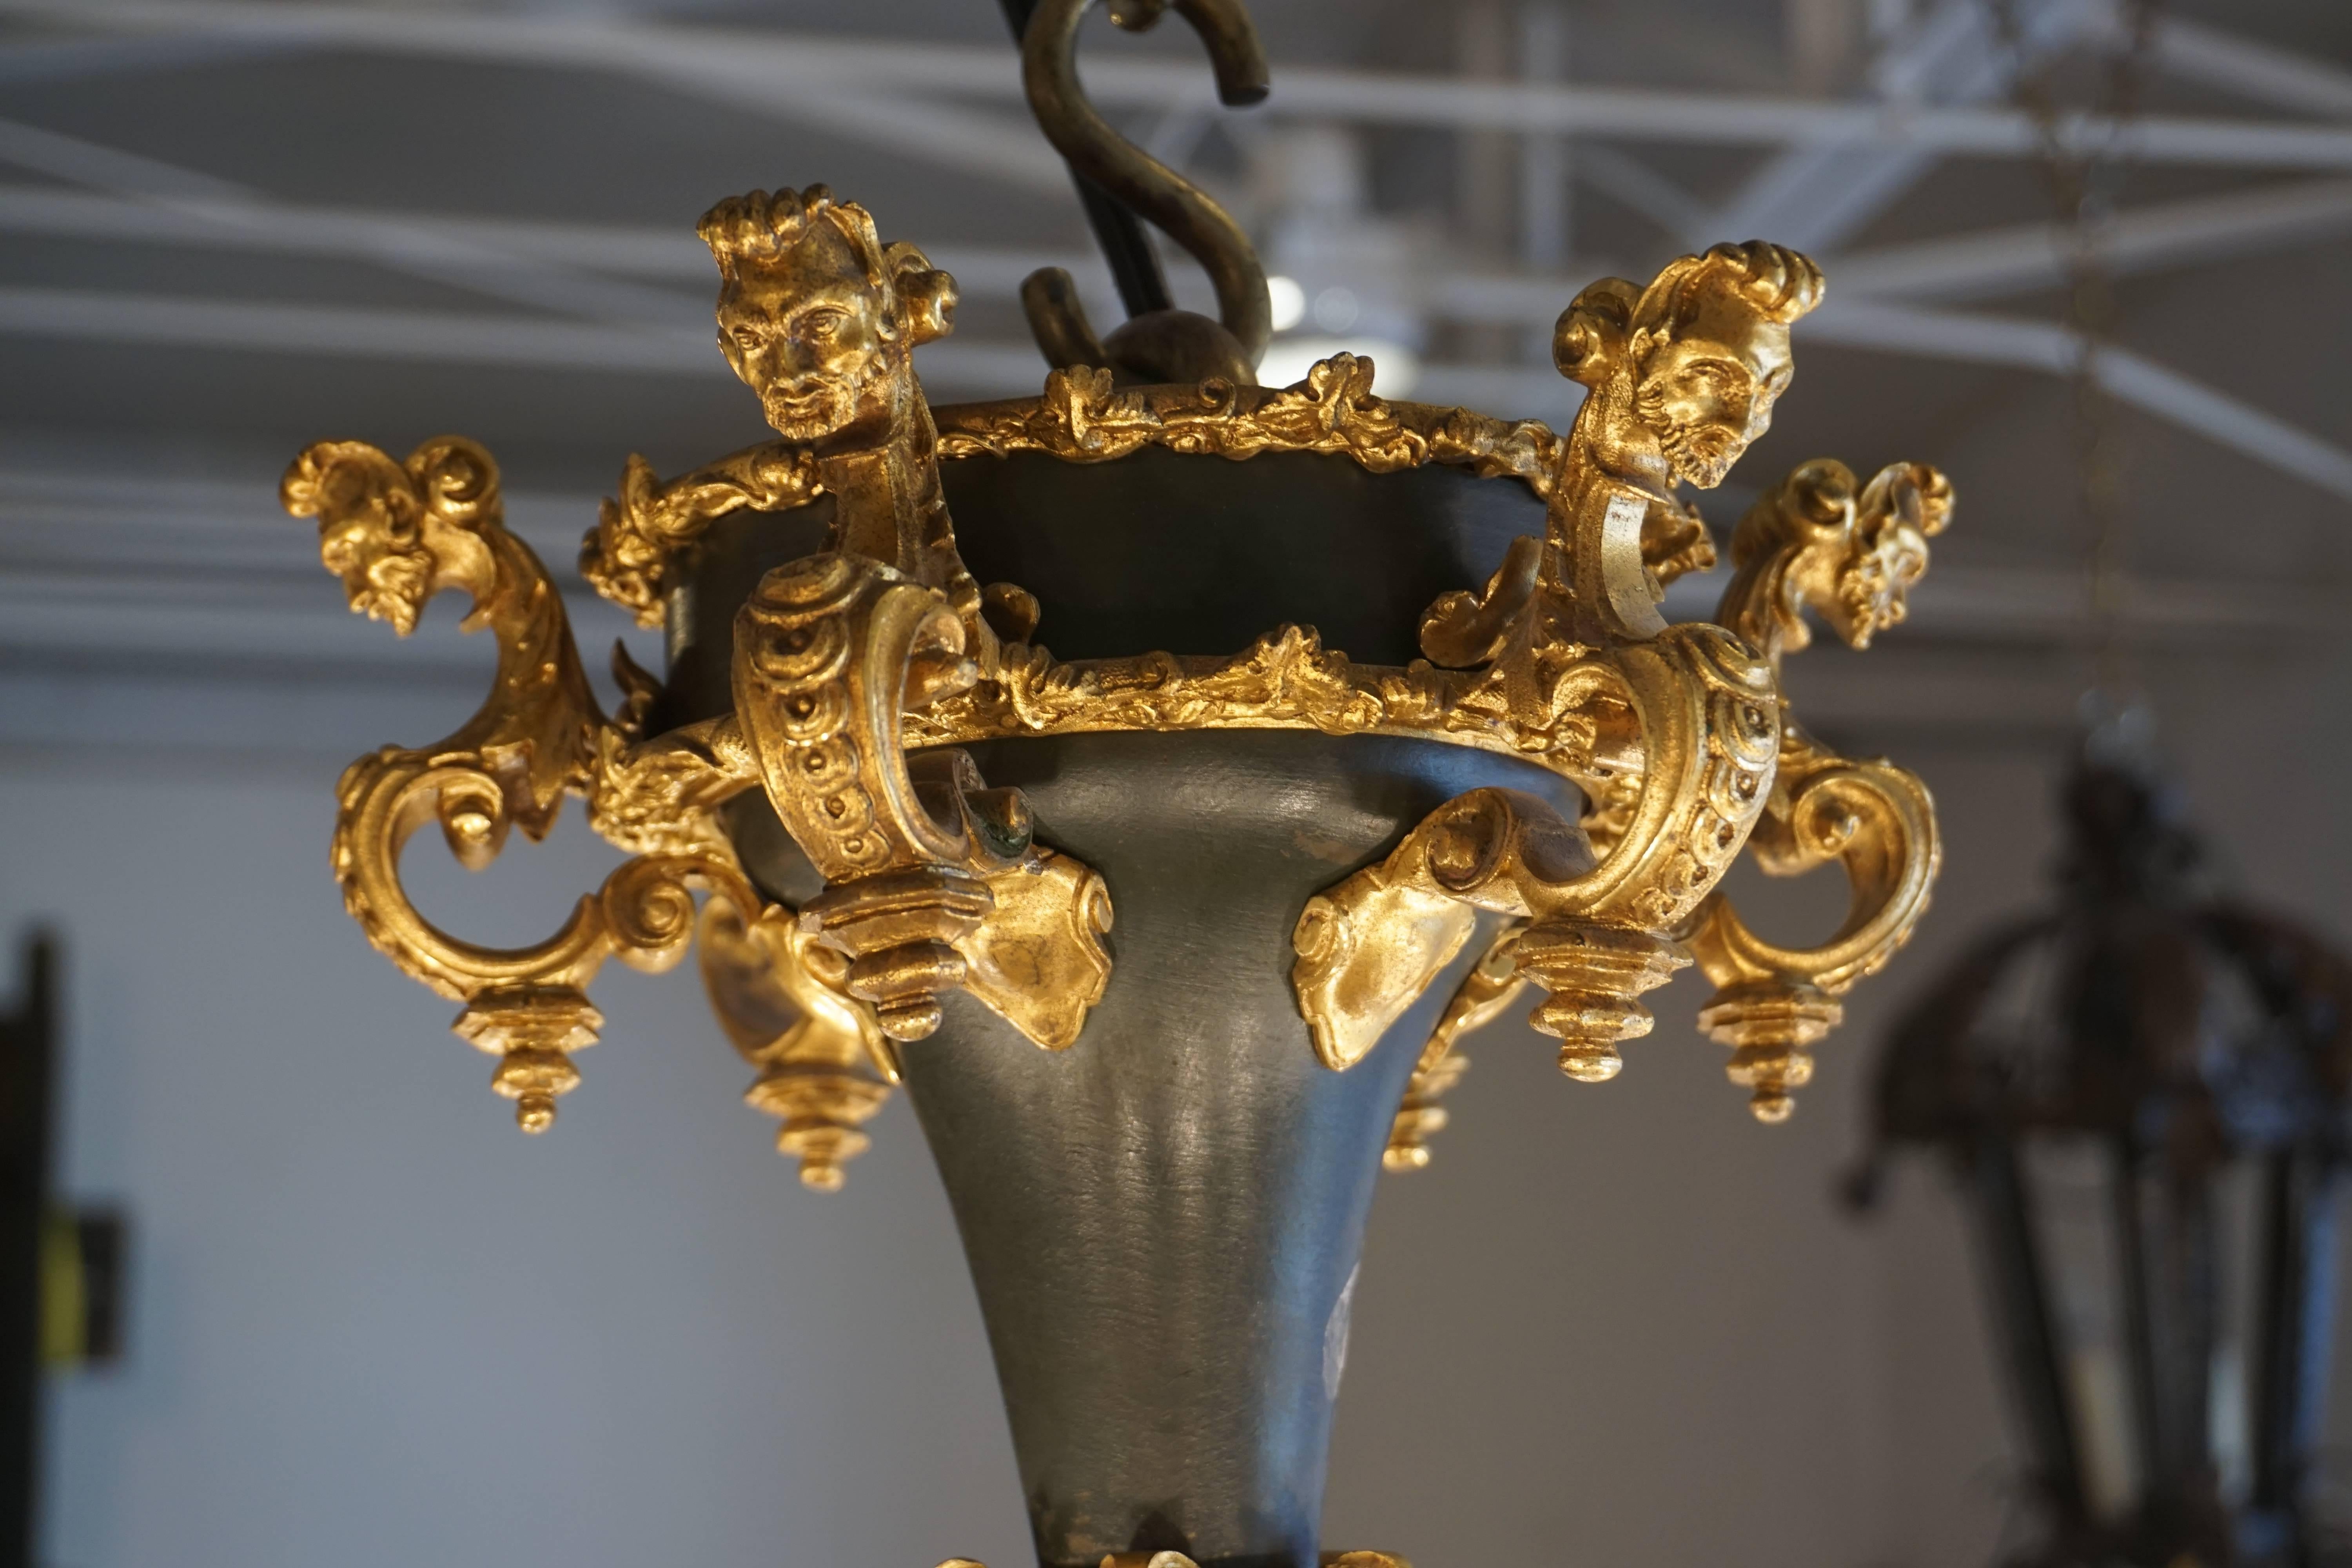 Twelve-light Baroque chandelier features a bronze, gold-plated and dark bronze finish, coupled with sweet cherub faces. It is a handsome light fixture with a lot of character, intricate carvings and rich in color. A wonderful view from any angle of